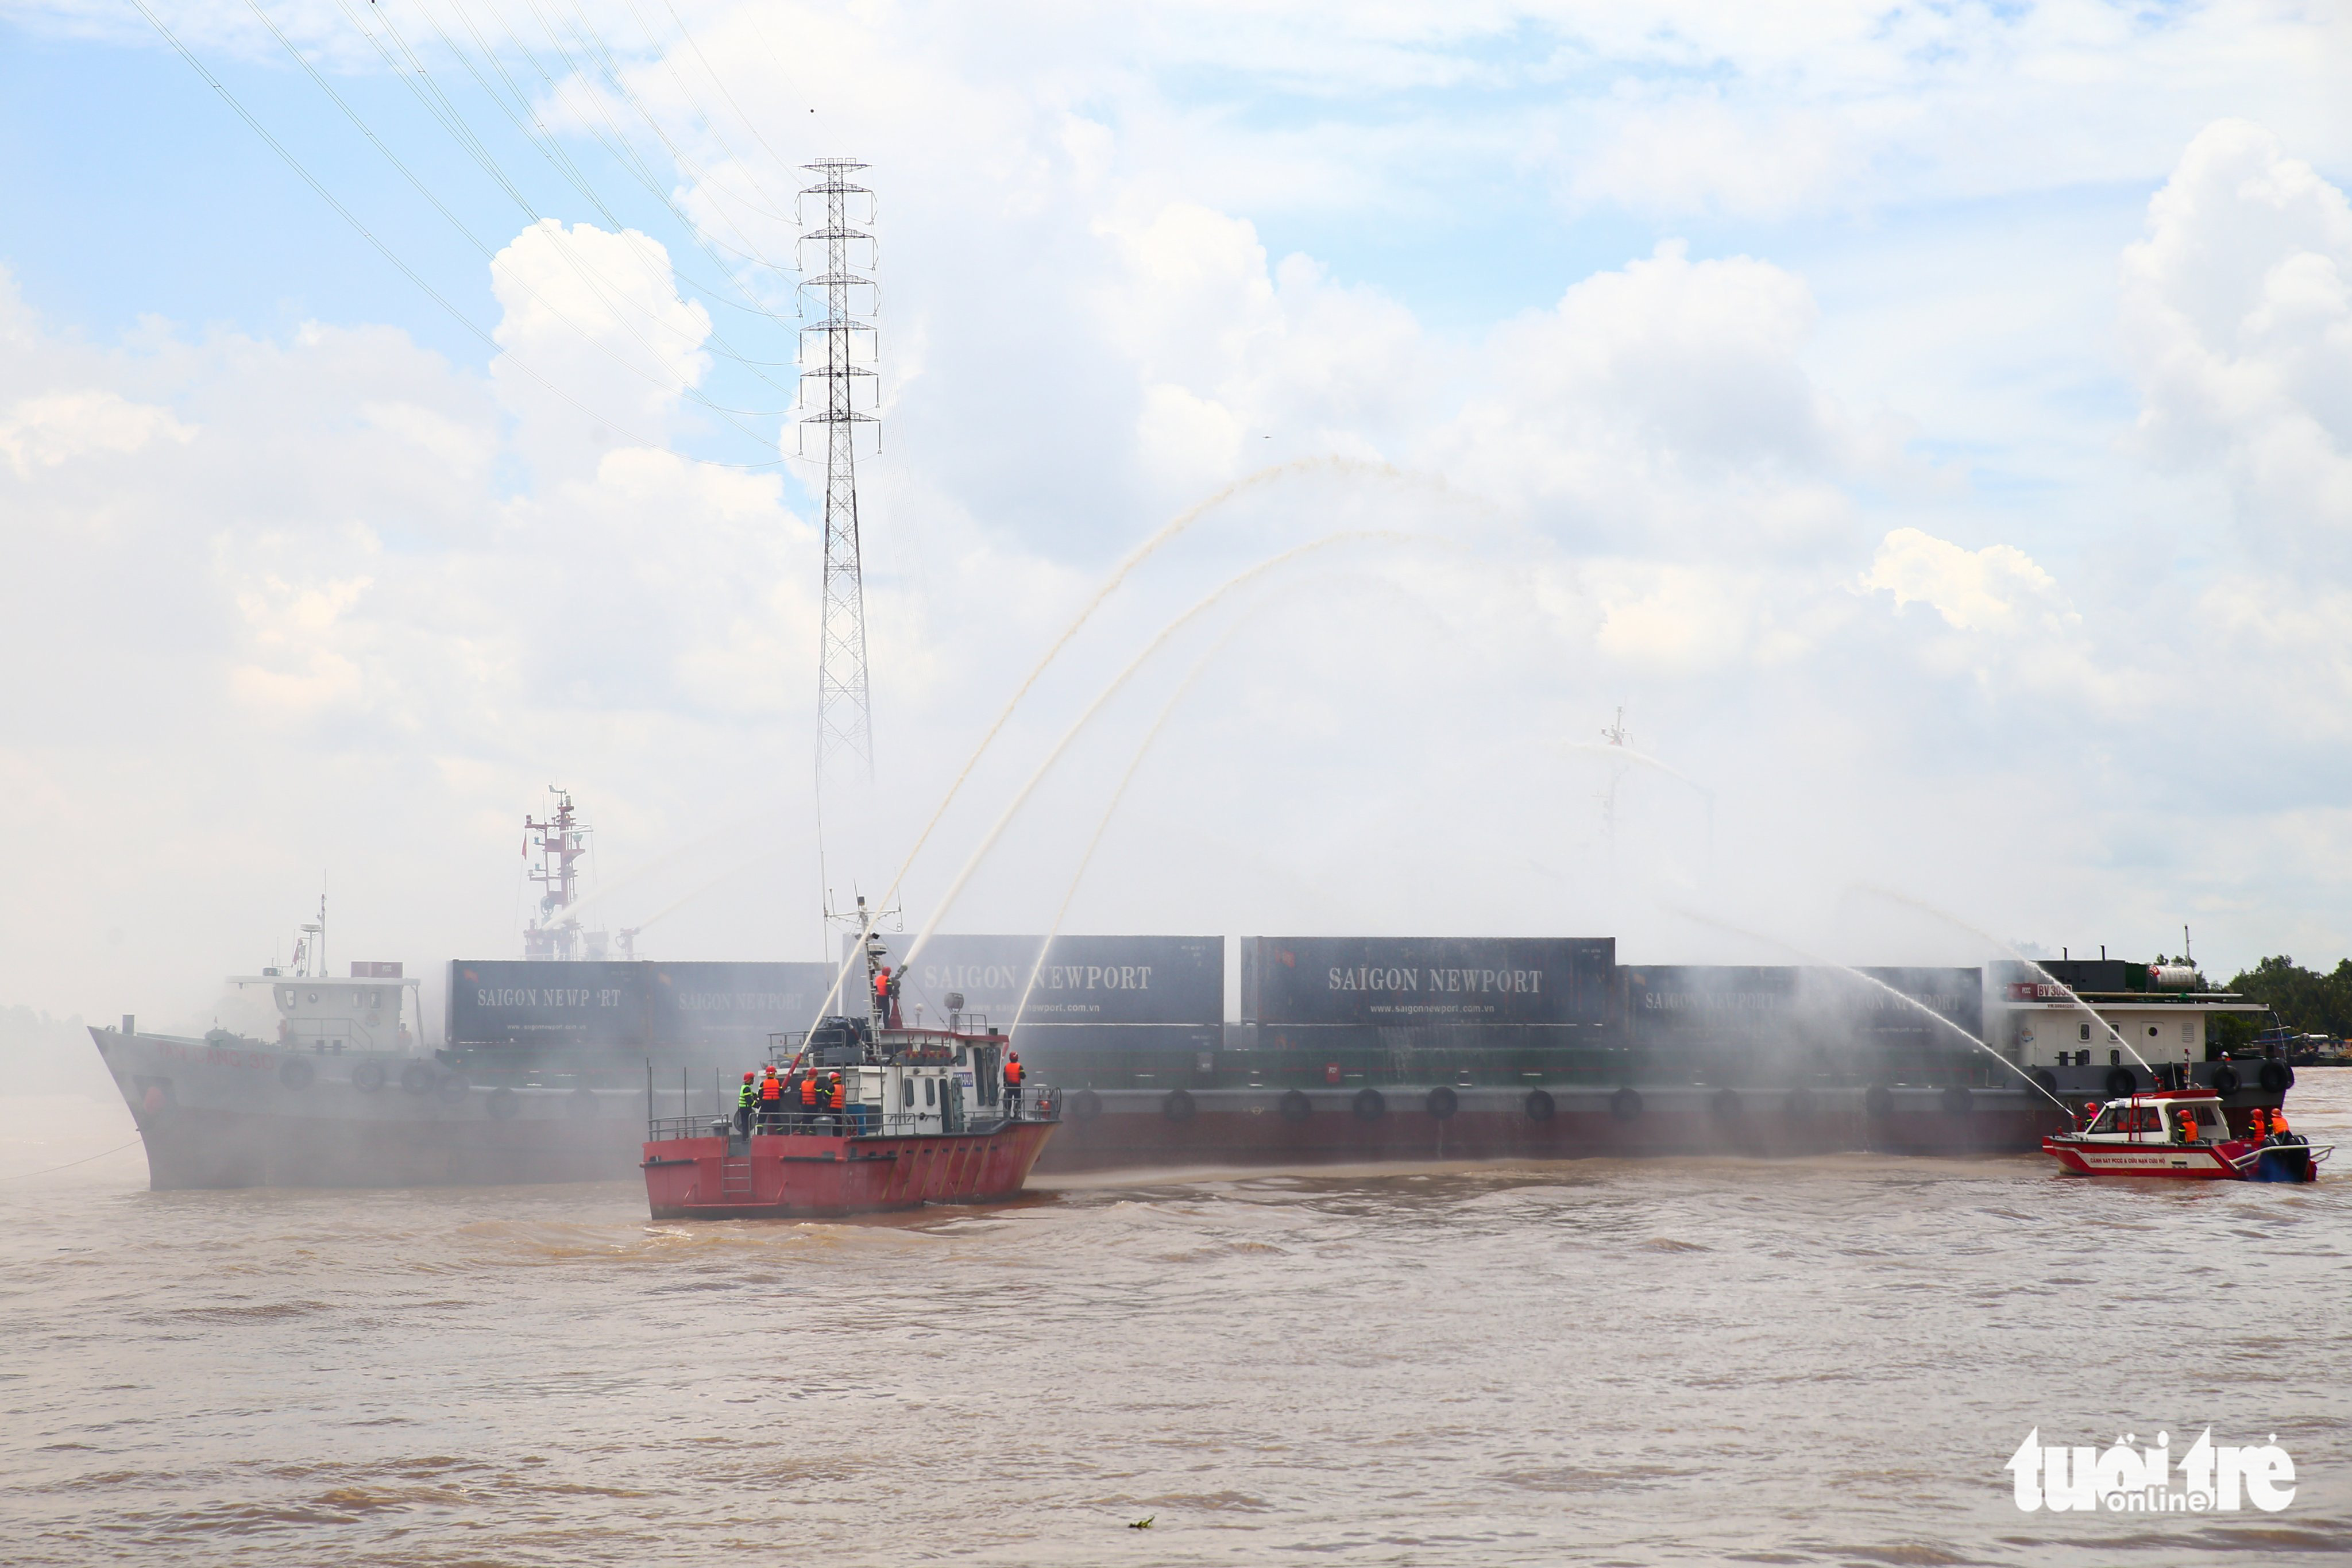 Over 400 take part in fire drill at Ho Chi Minh City port